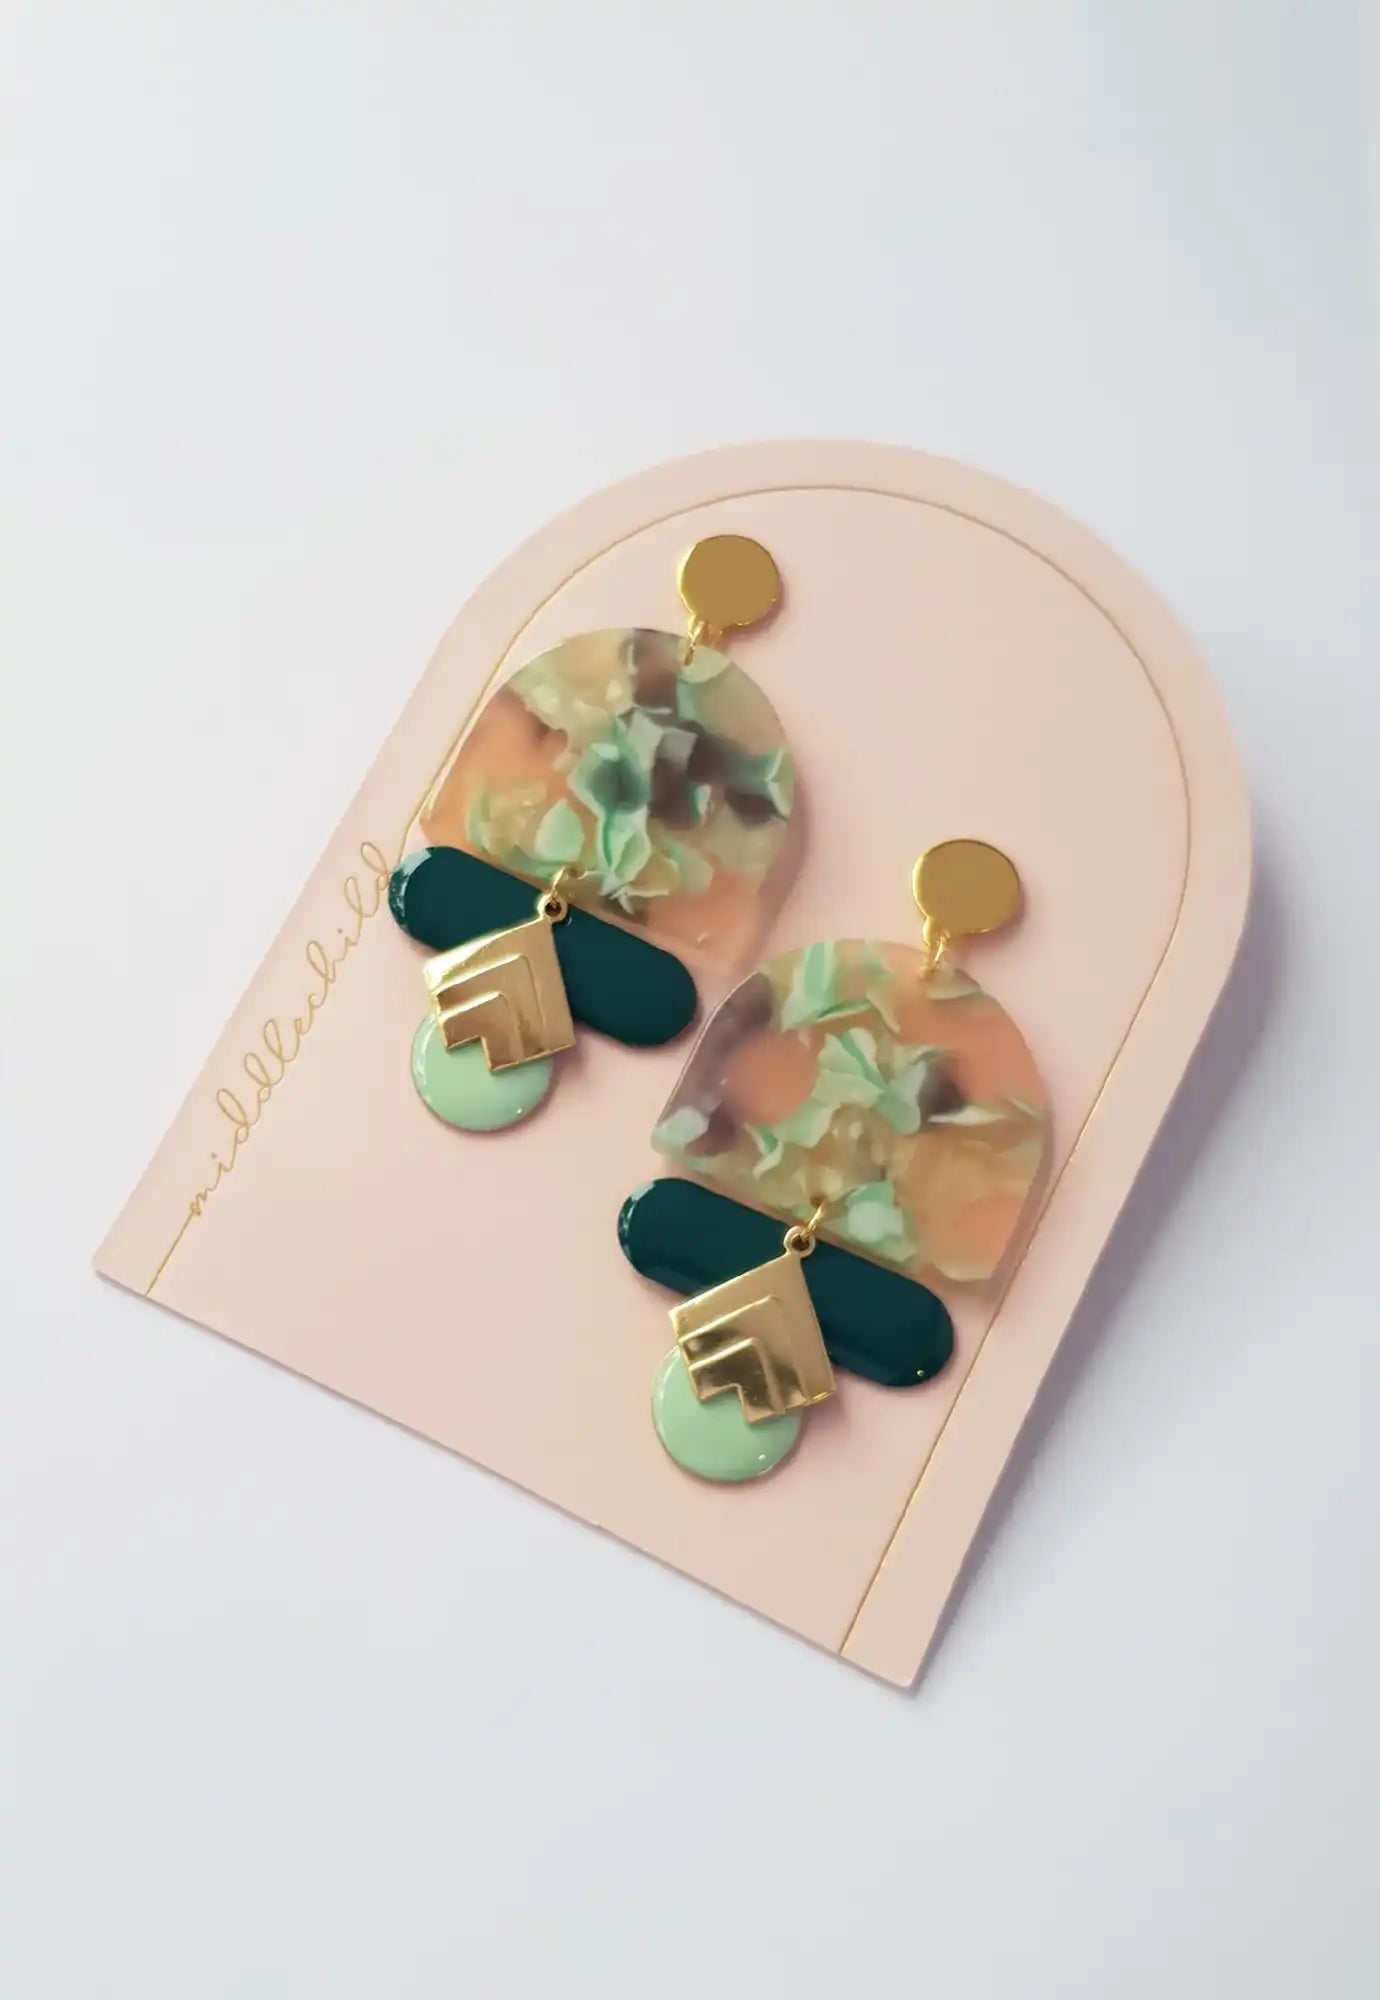 middle child - resonate earrings